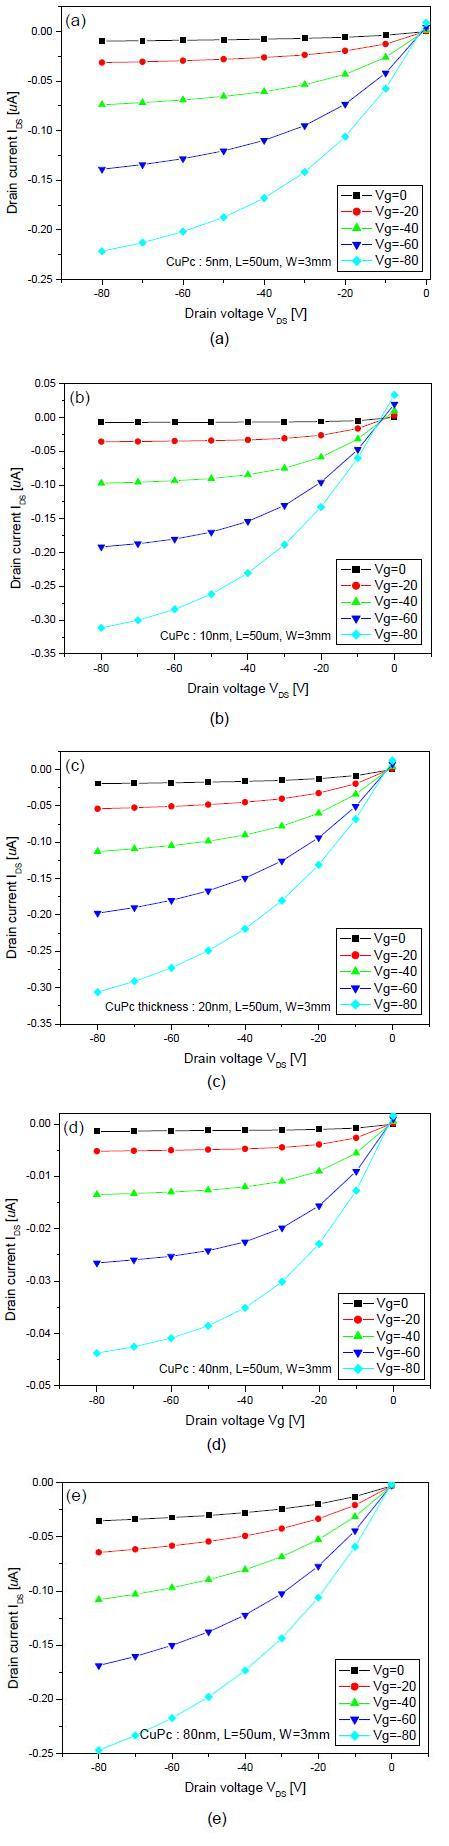 I？V characteristics of CuPc field-effect transistor devices with different thicknesses of the CuPc thin films: (a) 5 nm, (b) 10 nm, (c) 20 nm, (d) 40 nm, and (e) 80 nm.